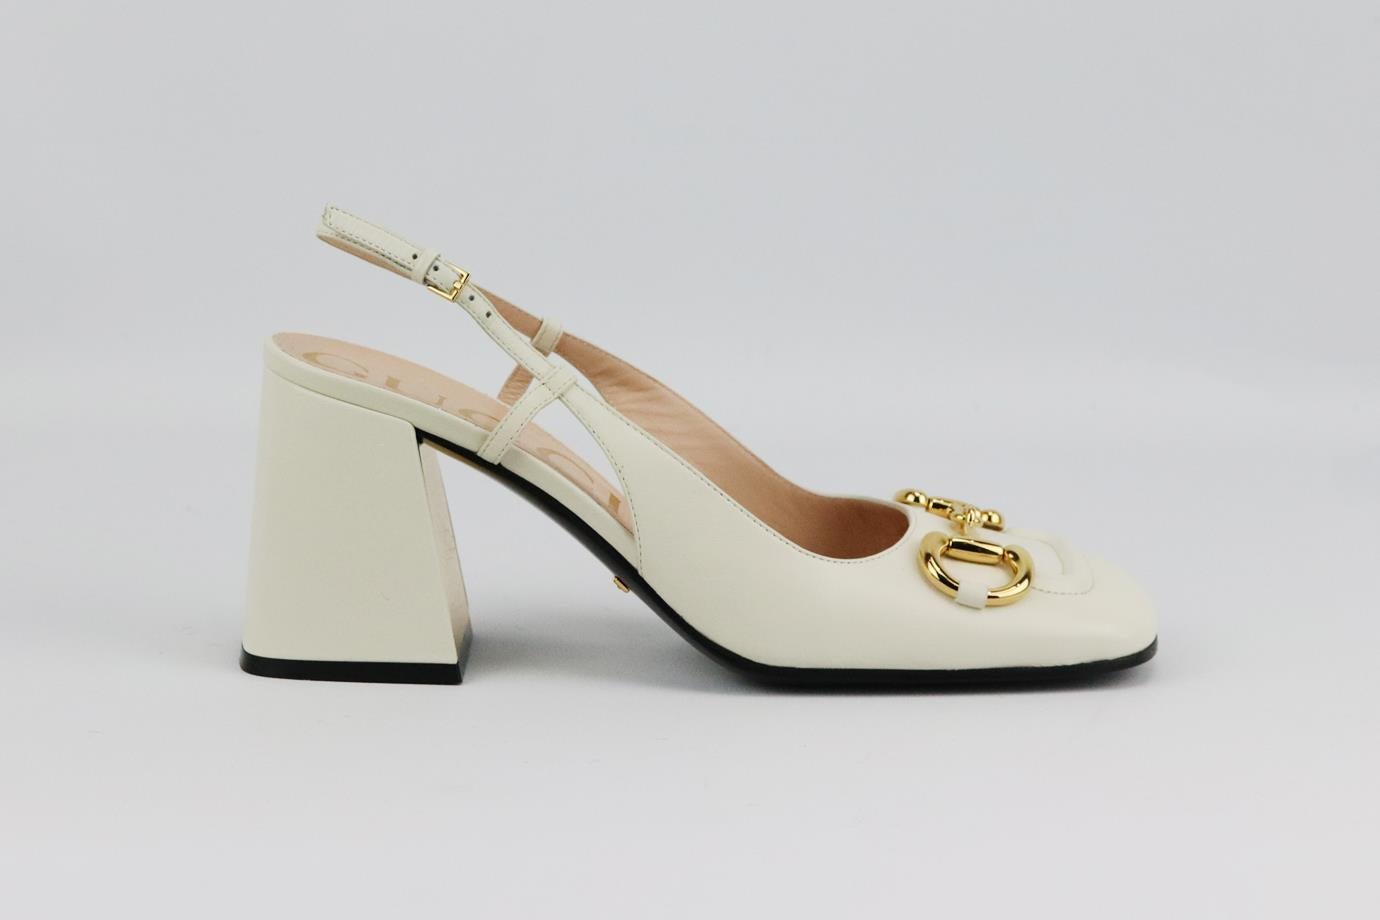 Gucci Baby Horsebit detailed leather slingback pumps. Cream. Buckle fastening at side. Does not come with box or dustbag. Size: EU 40 (UK 7, US 10). Insole: 10.7 in. Heel: 3 in
